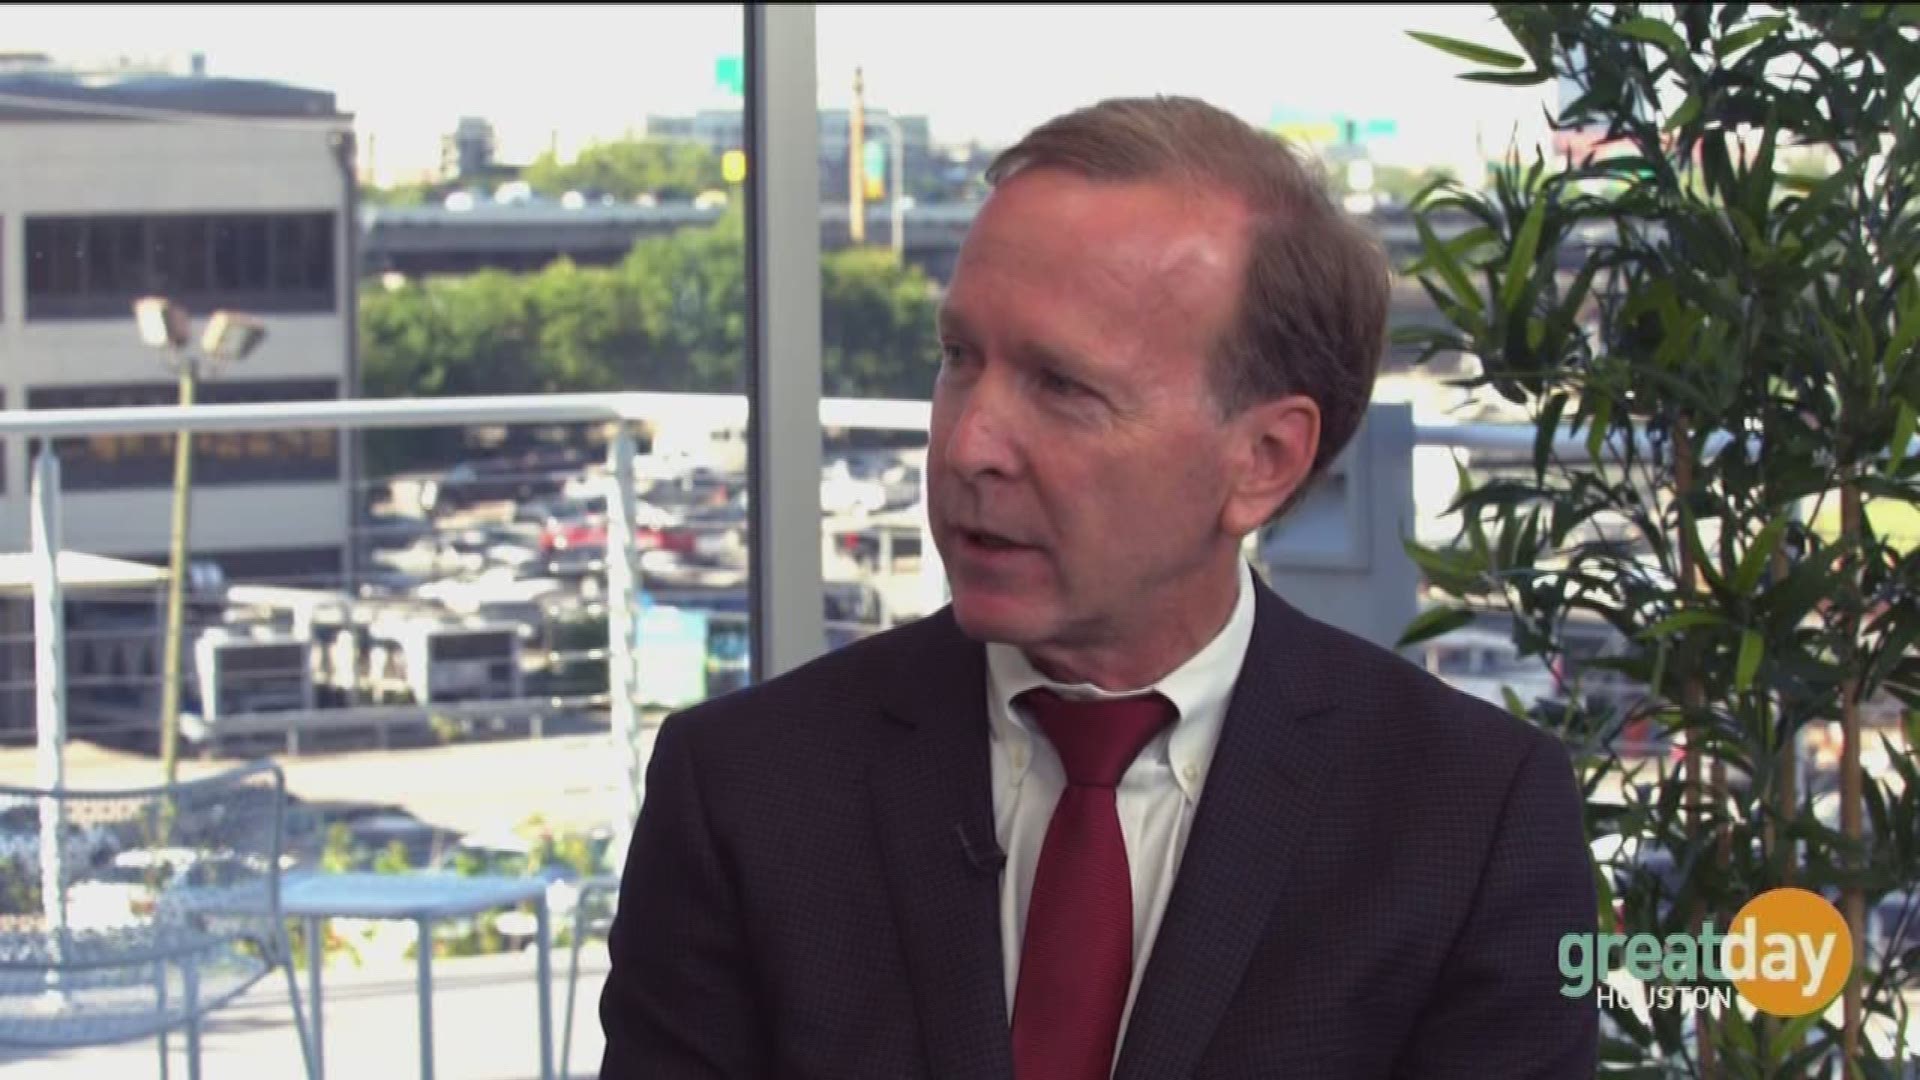 Neil Bush give an update on his mom Barbara, and talks about for love for helping kids learn how to read.